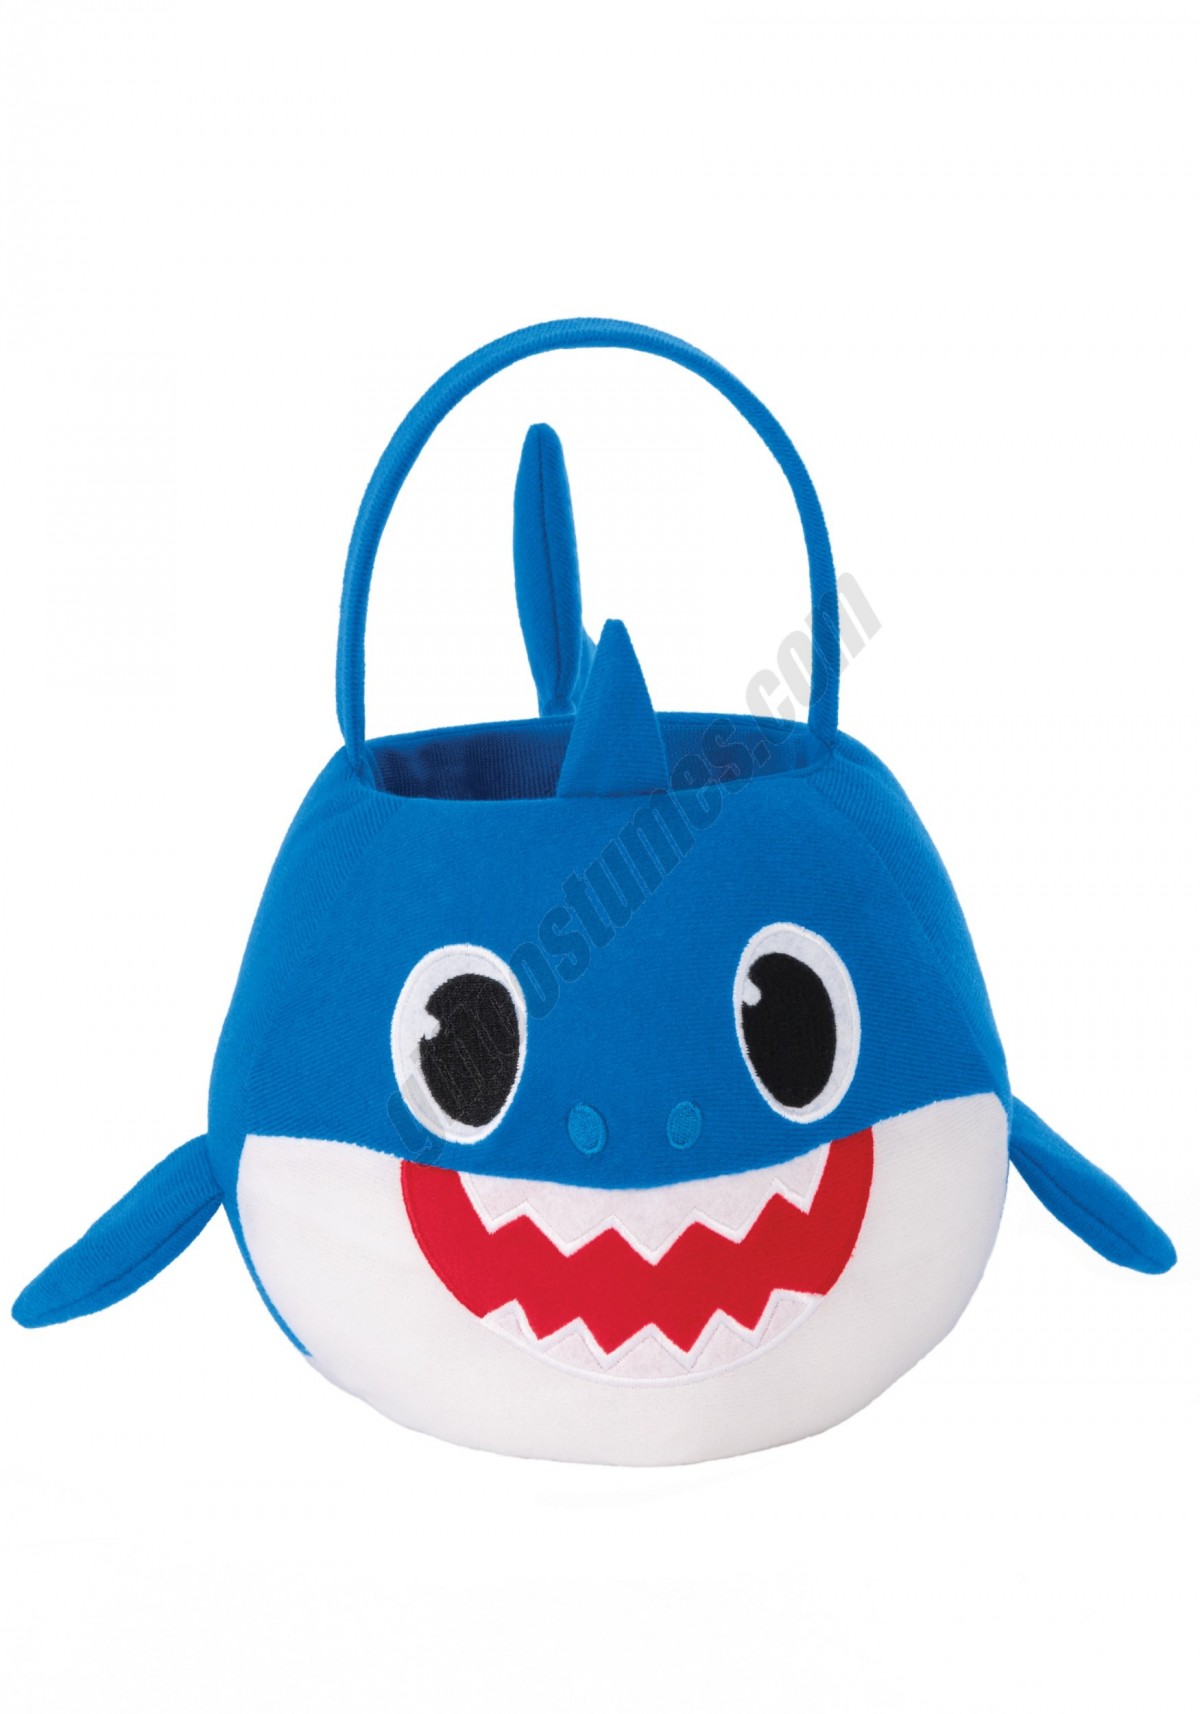 Daddy Shark Treat Tote with Soundchip Promotions - -0